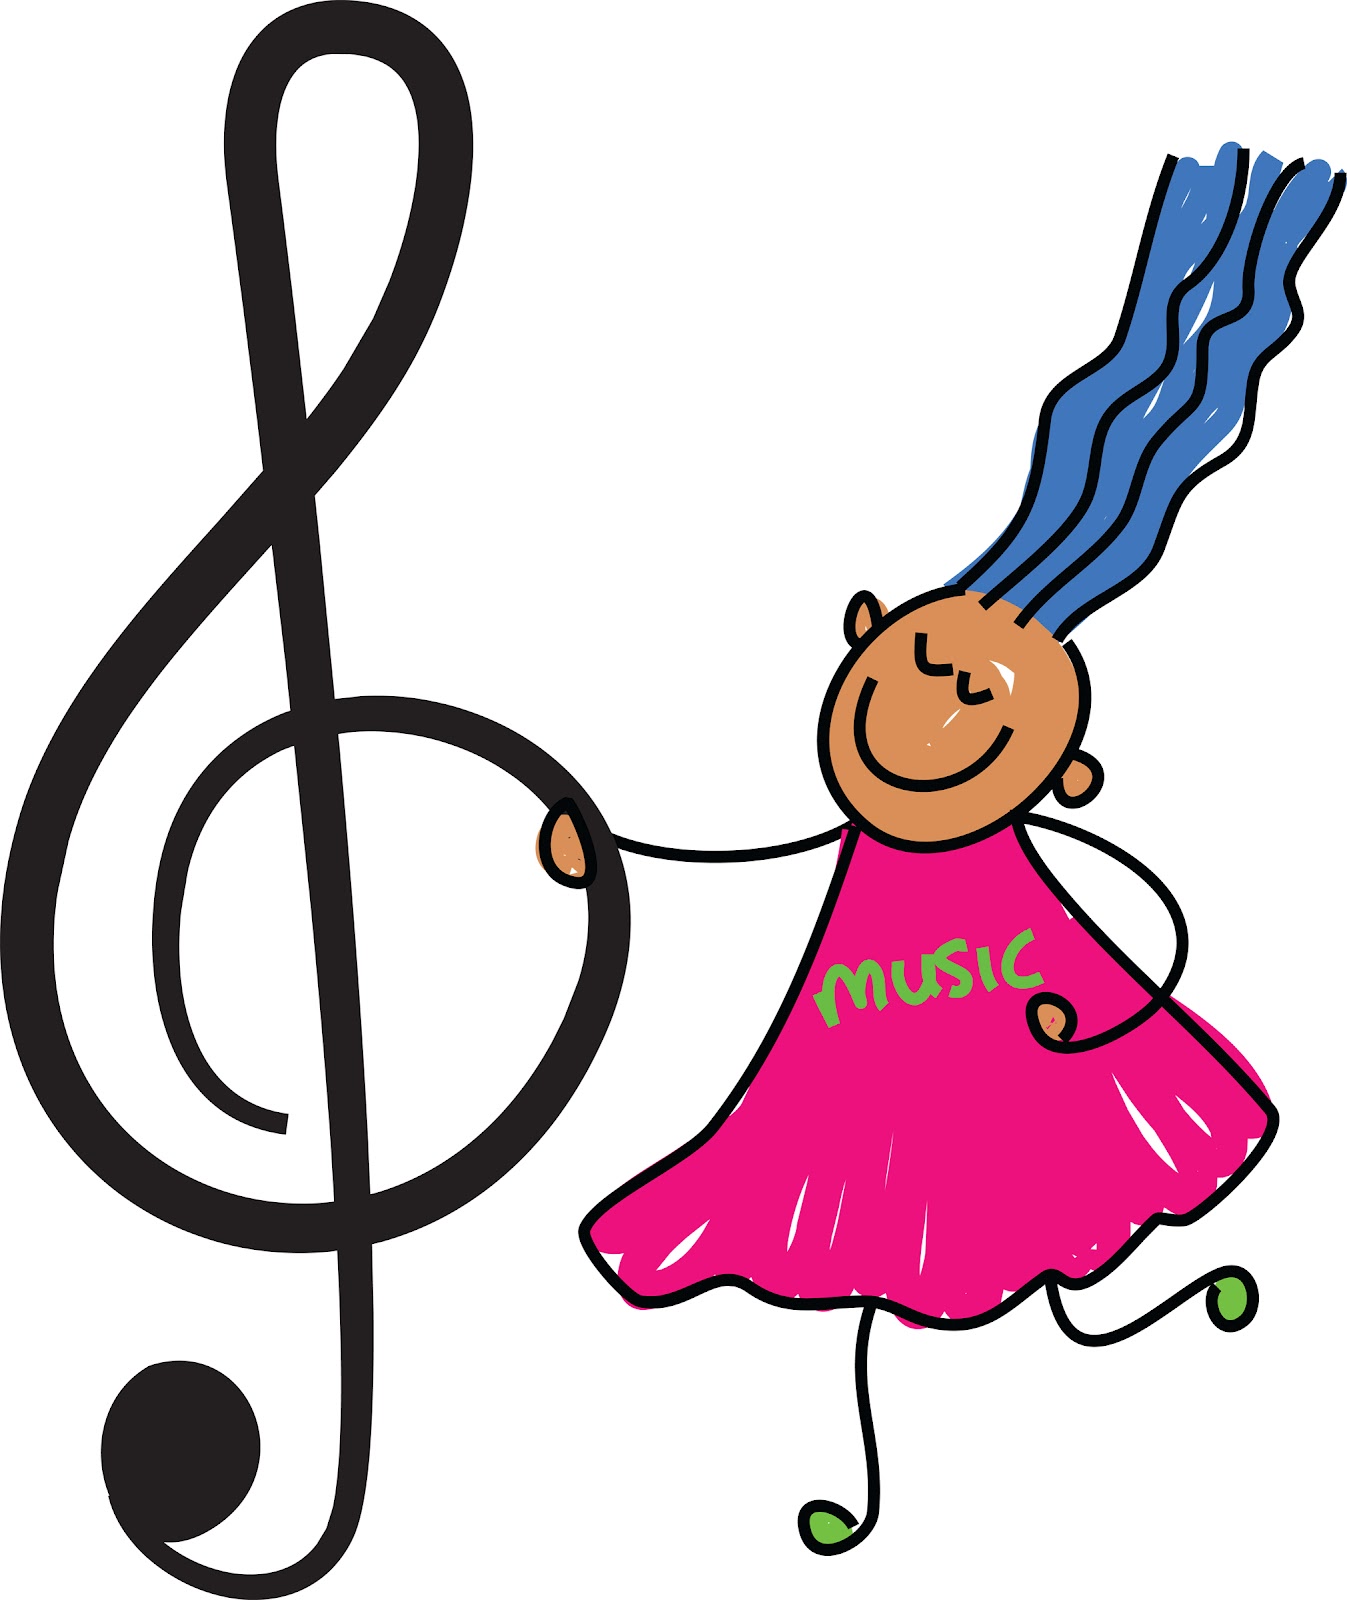 Musical music notes clip art and image 2 - Clipartix